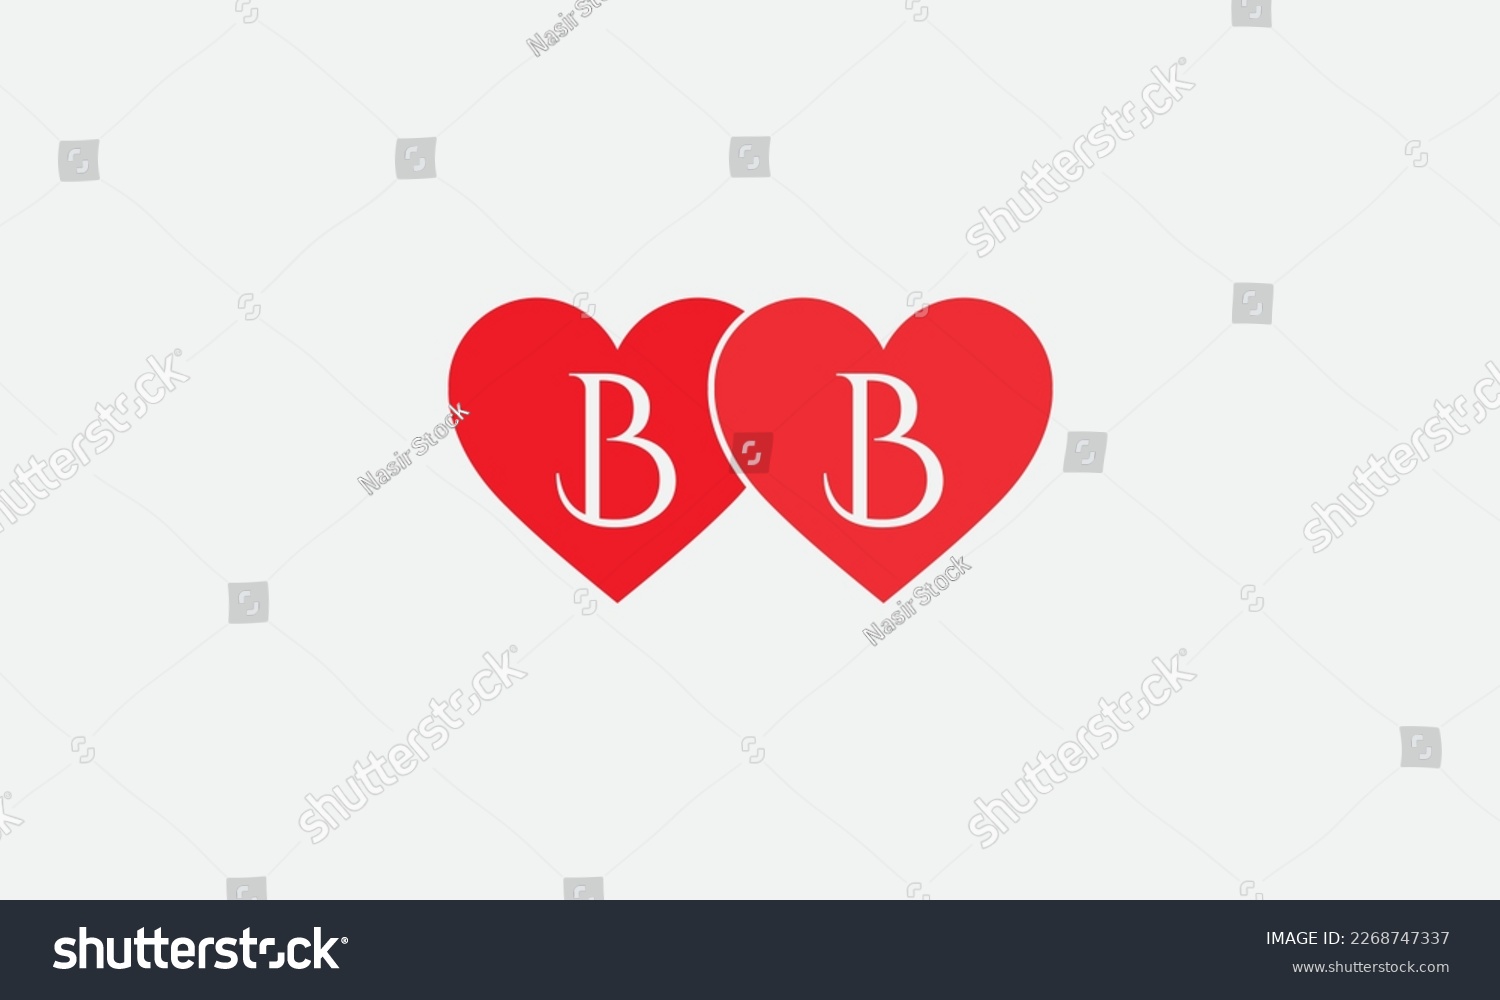 SVG of Colorful hearts shape. Double heart sign letters. Valentine icon and love symbol. Romance love with heart sign and letters. Gift red love svg